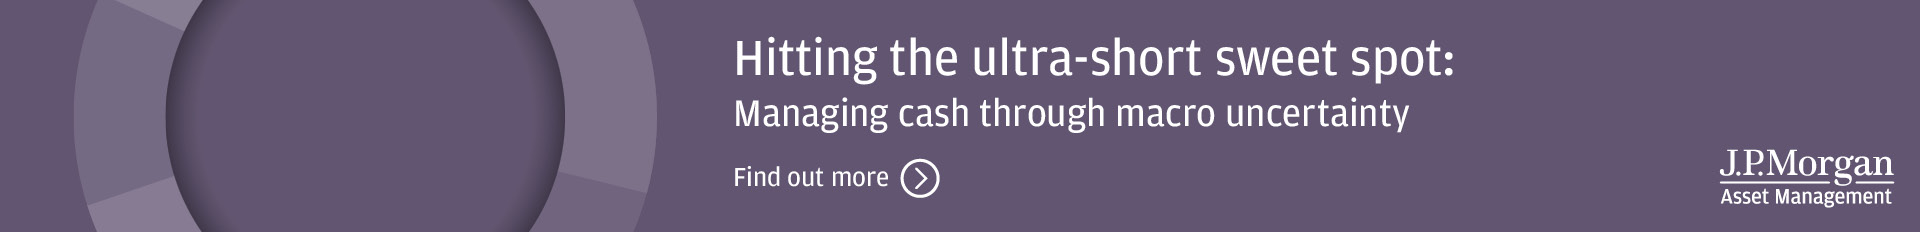 J.P Morgan Asset Management – Hitting the ultra-short sweet spot: managing cash through macro uncertianty – find out more